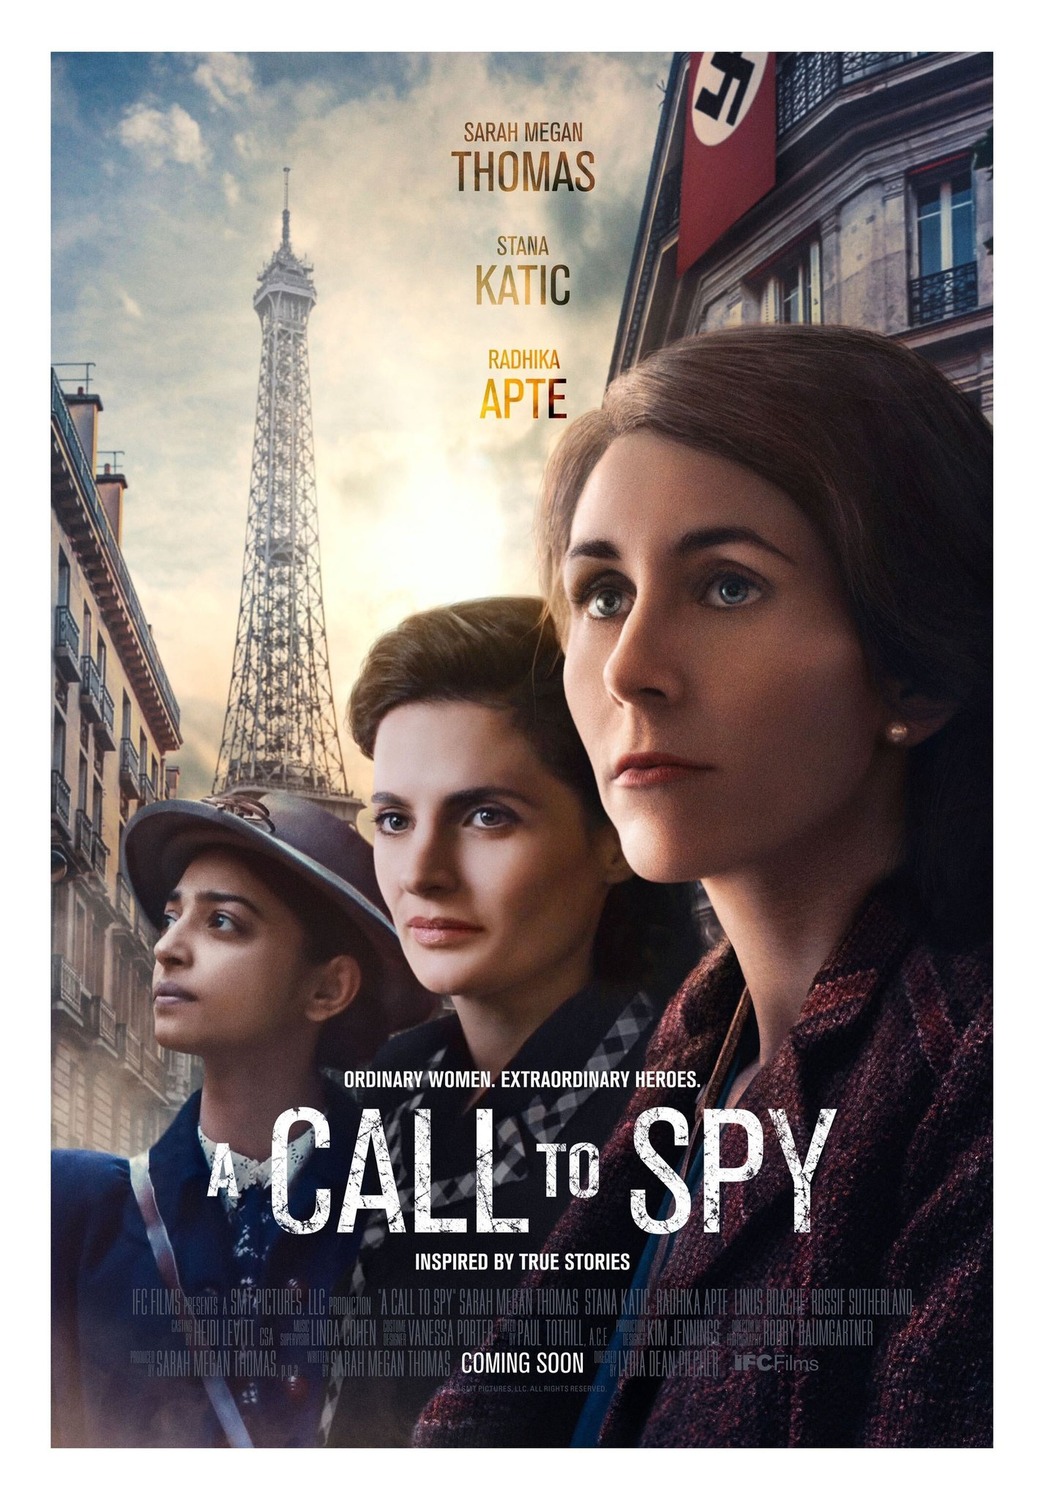 Cover art for "A Call to Spy"